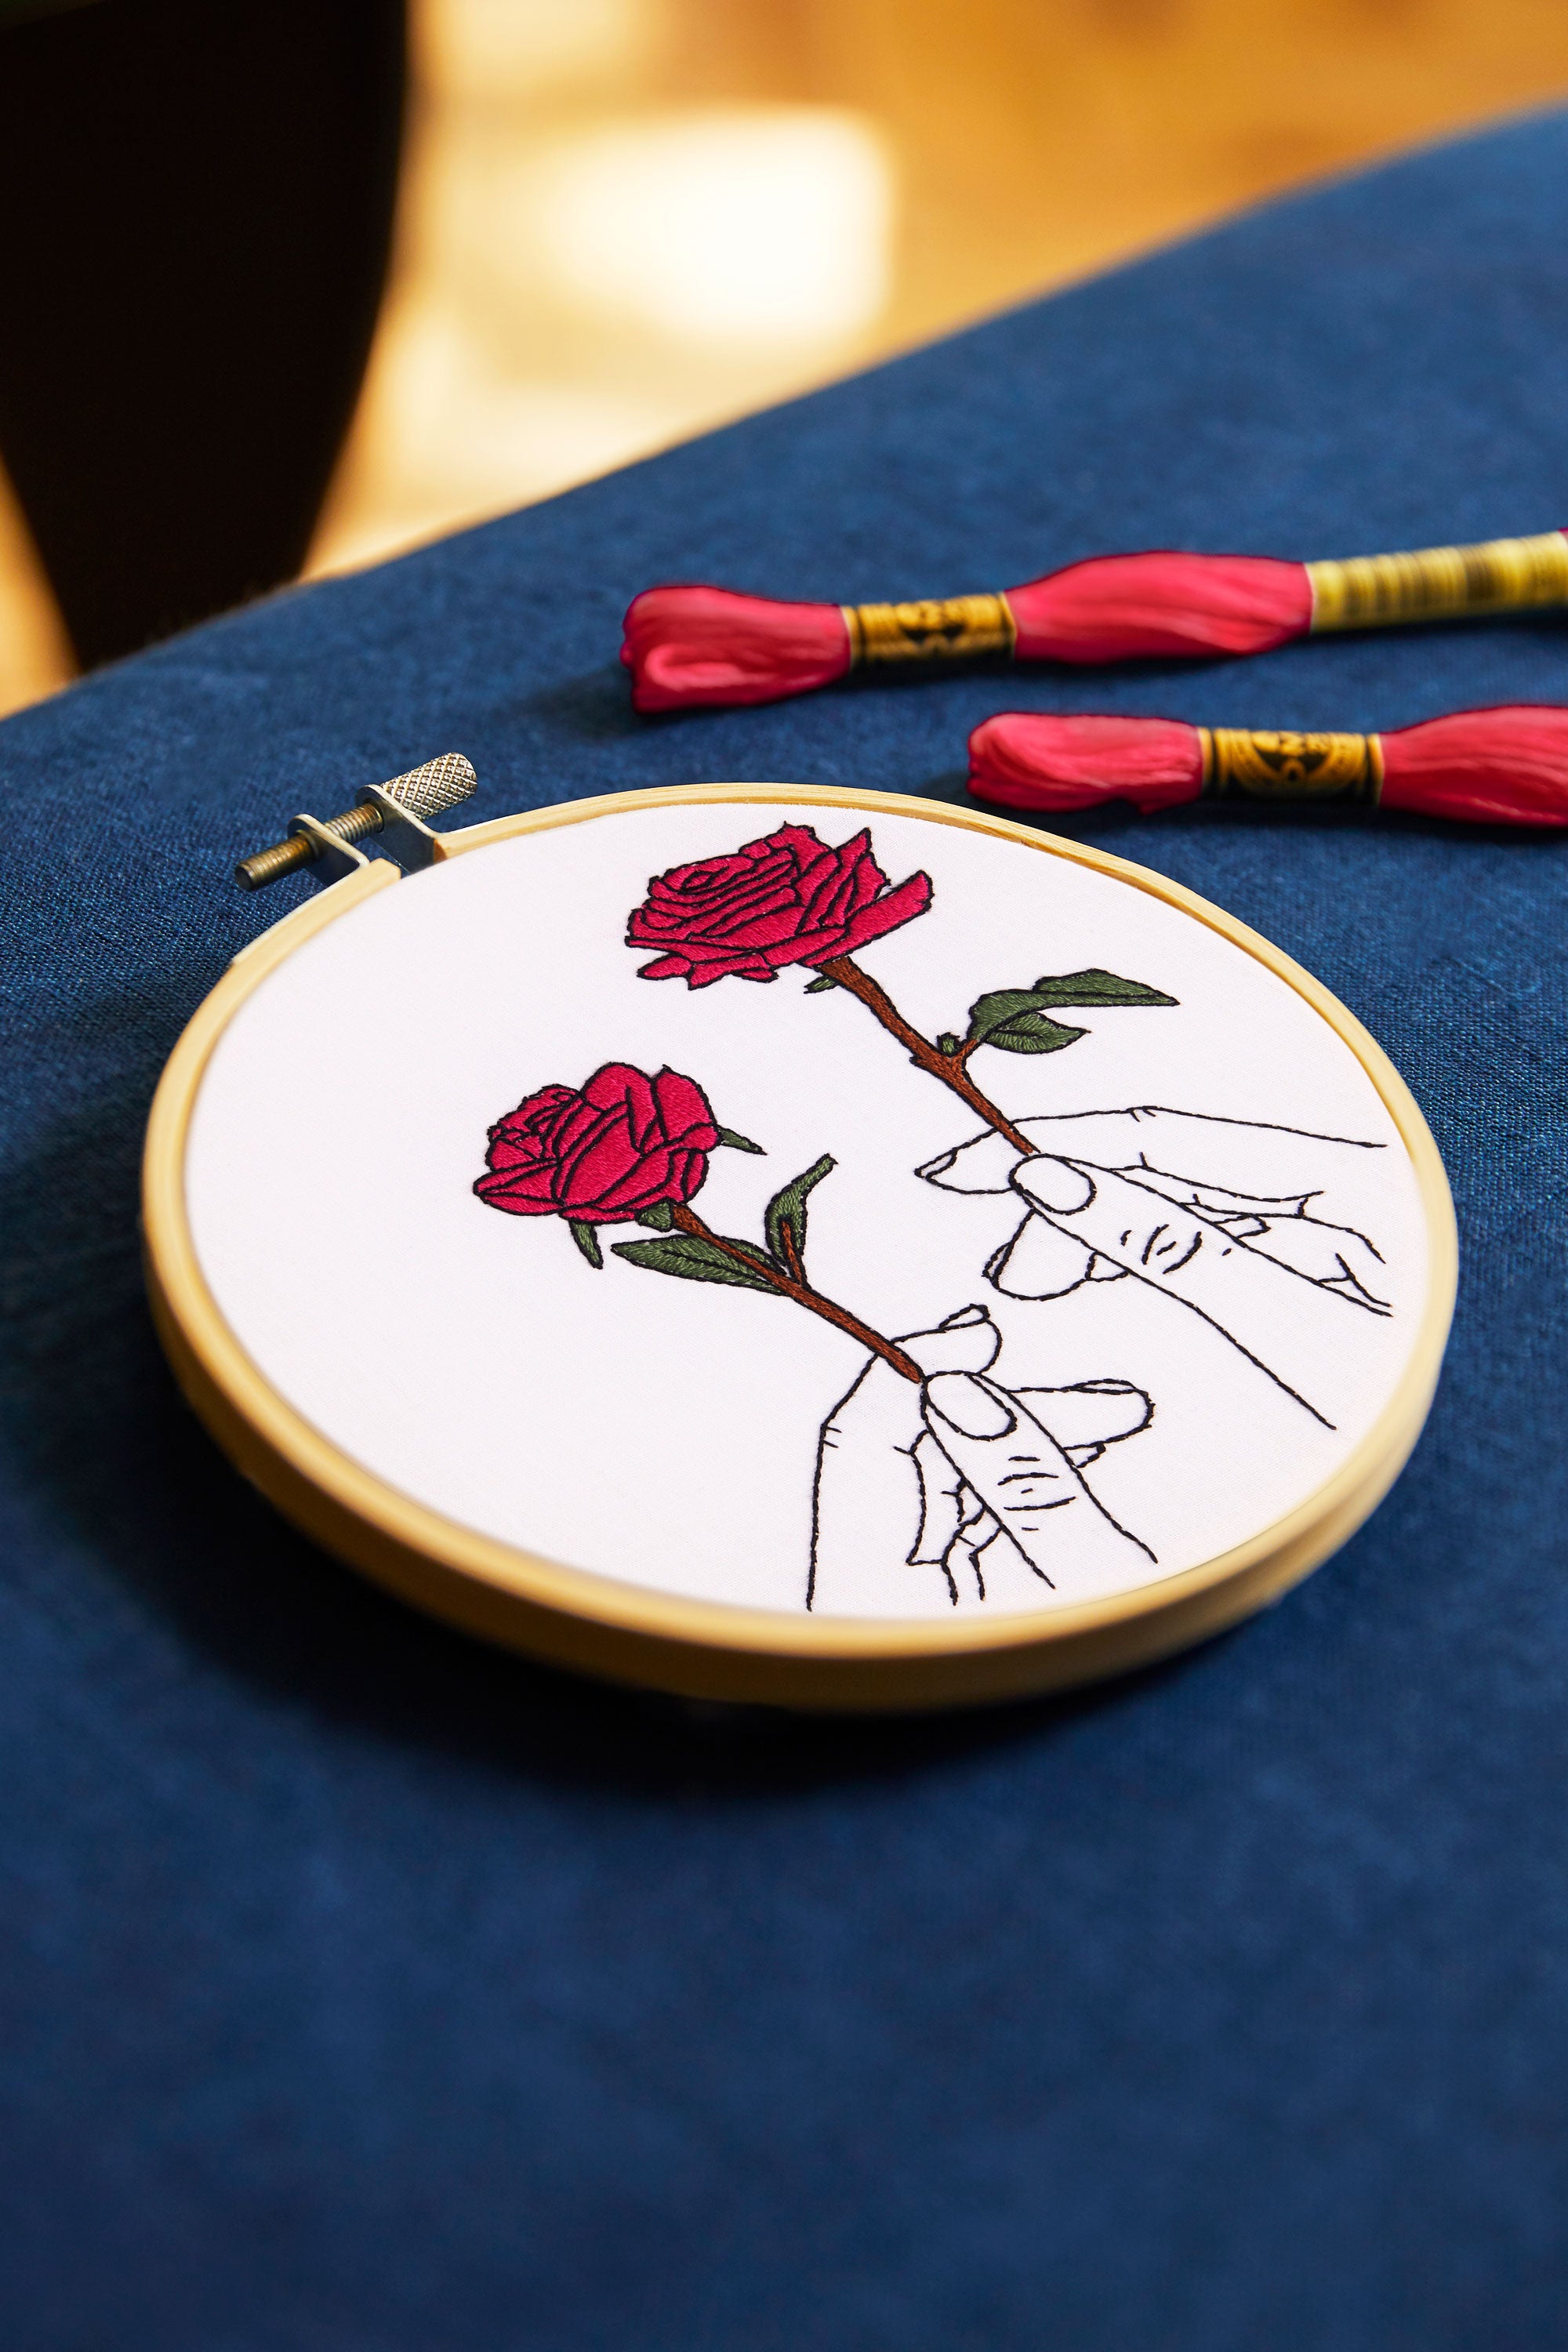 DMC Rose in Hands by Jenni Davis (Embroidery Kit)